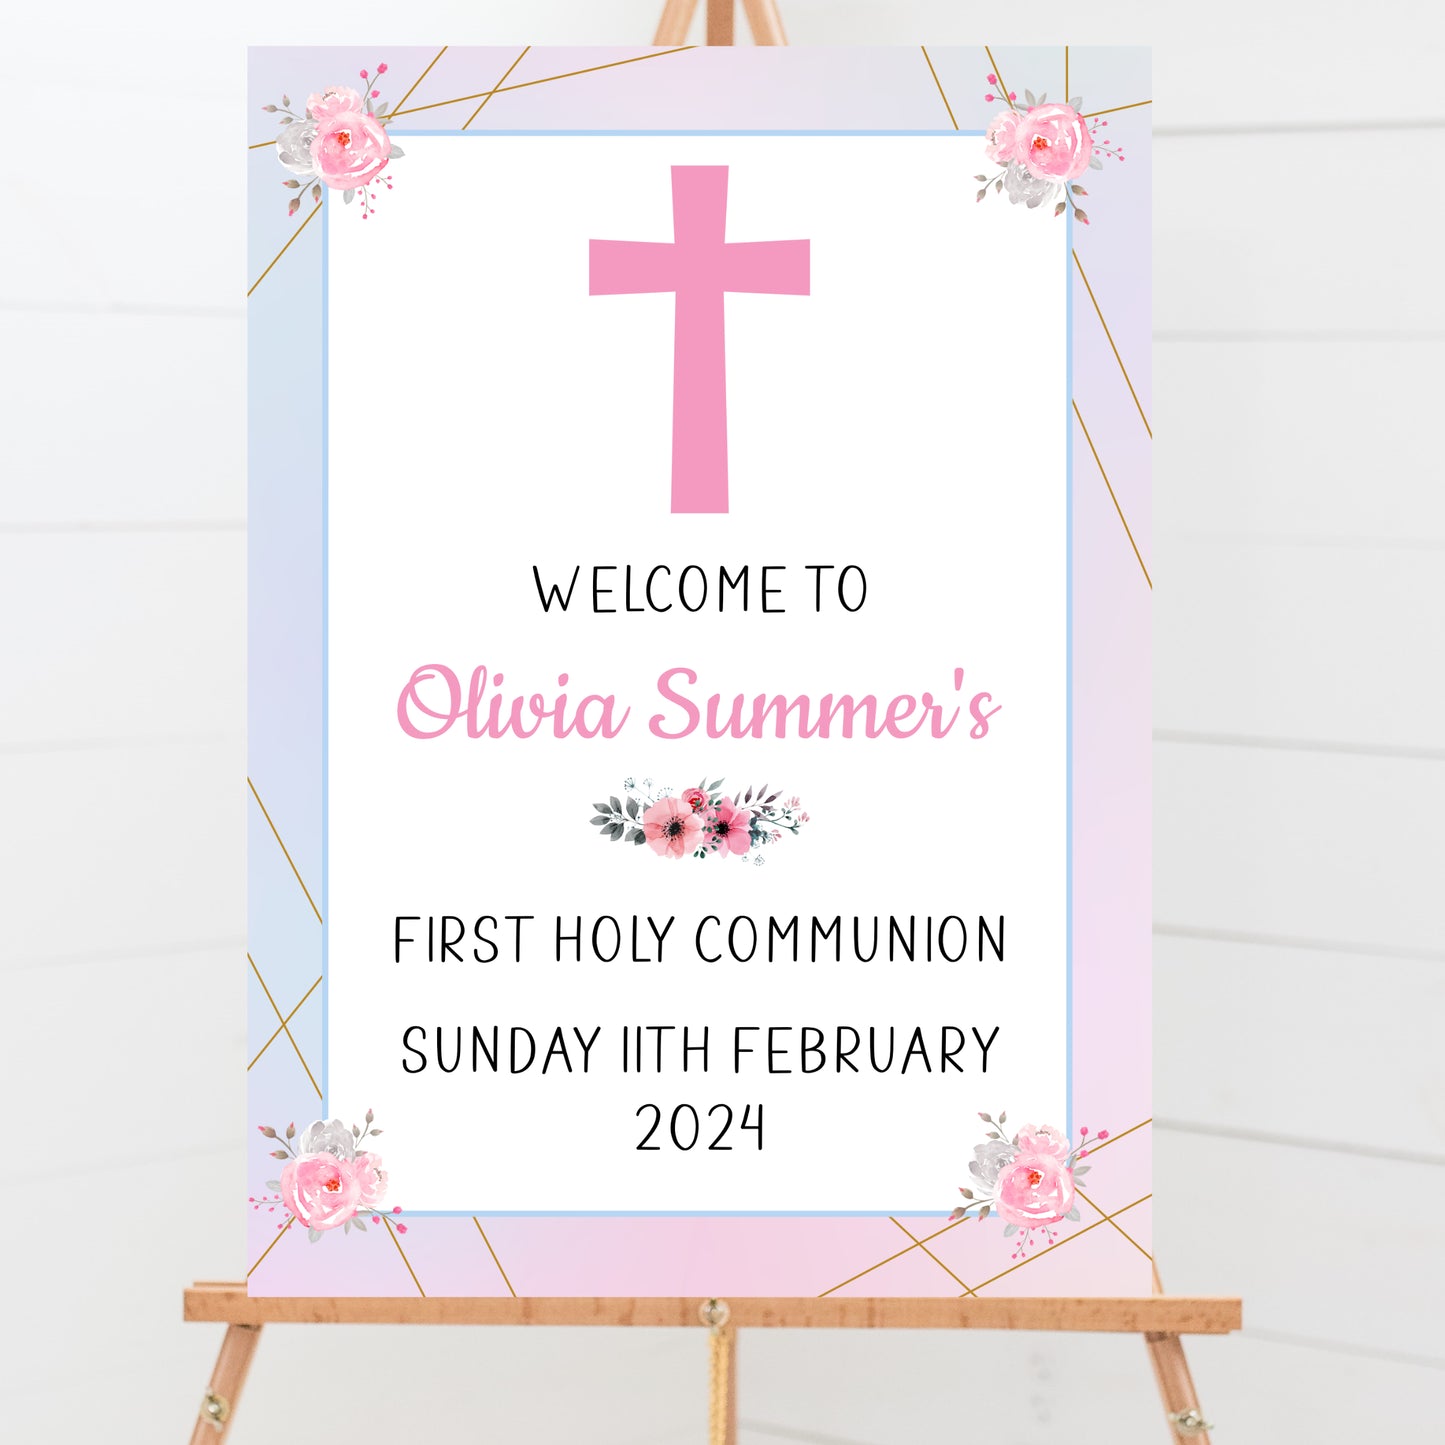 a welcome sign with a pink cross on it